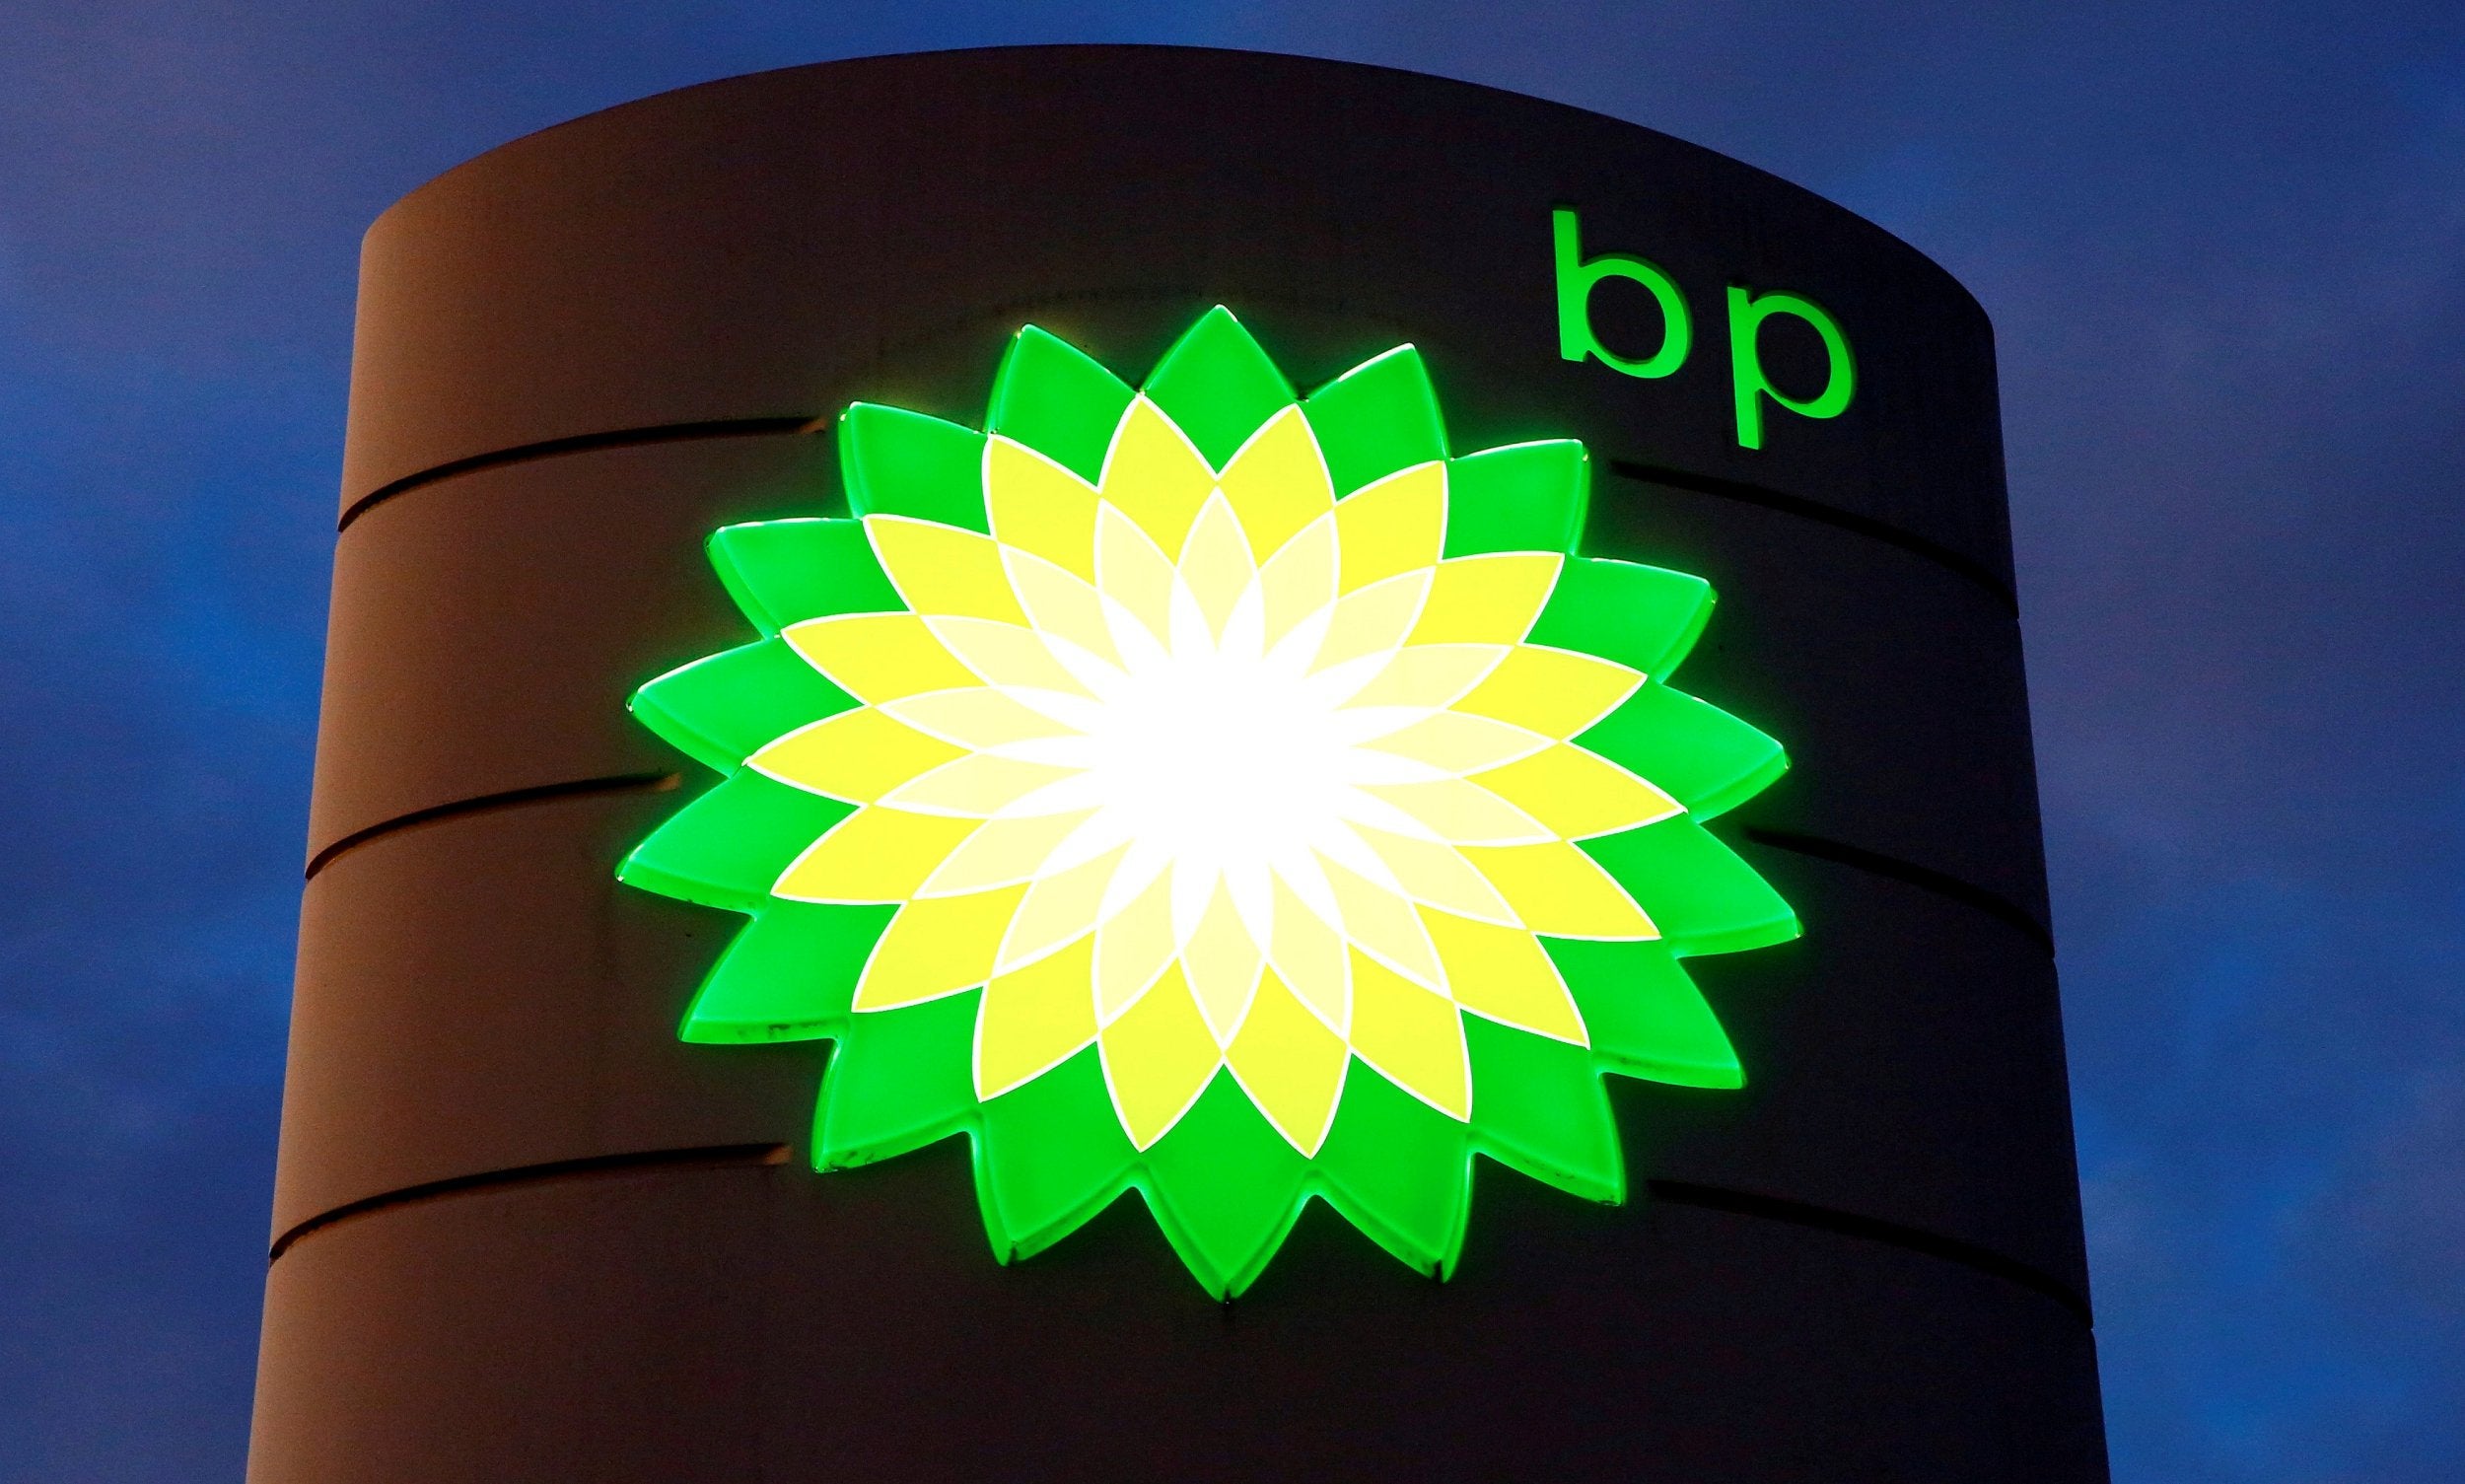 BP expects payments of $3bn this year related to the April 2010 Deepwater Horizon oil disaster